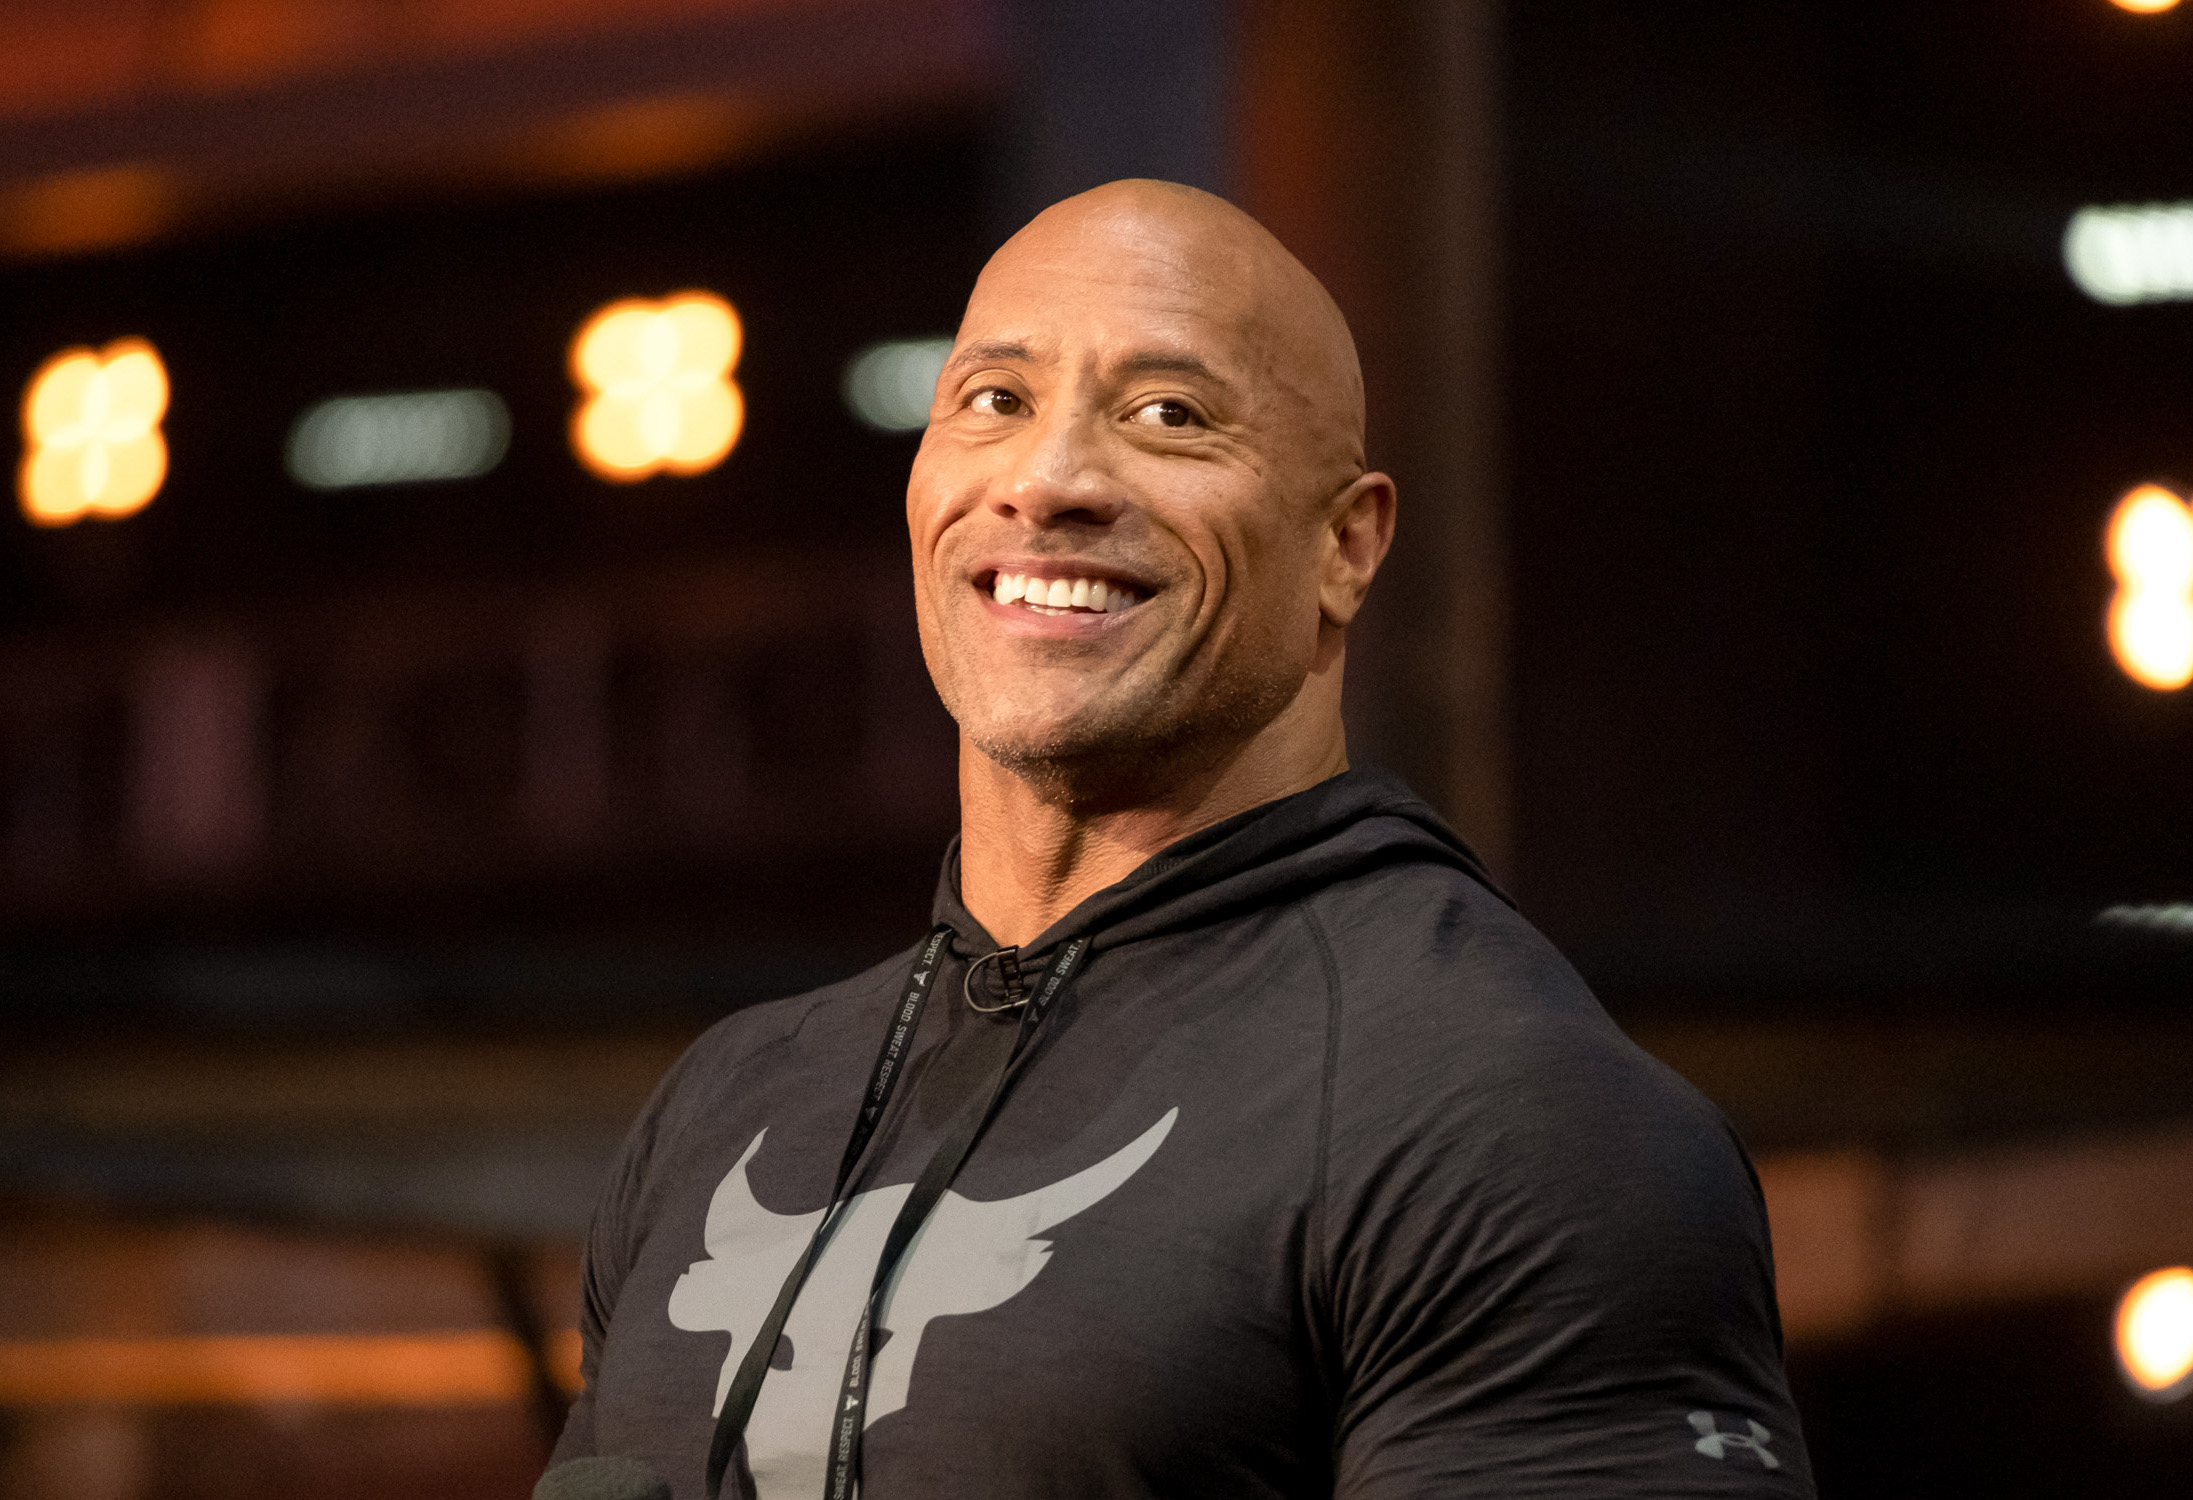 The Rock talks about his three bouts of depression.